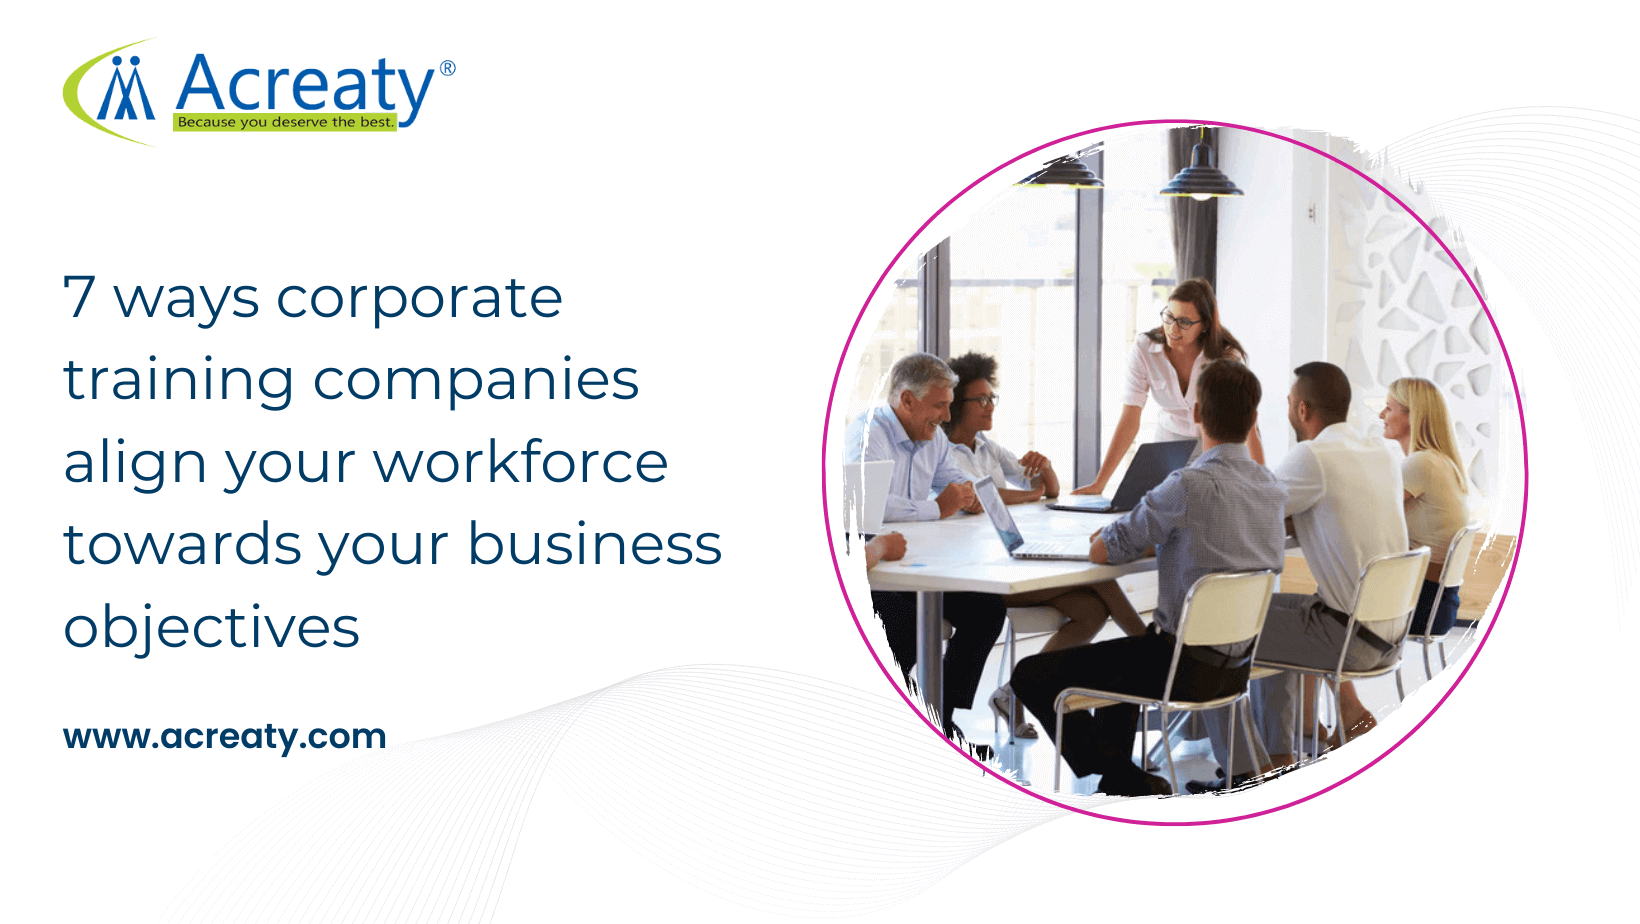 7 ways corporate training companies align your workforce towards your business objectives